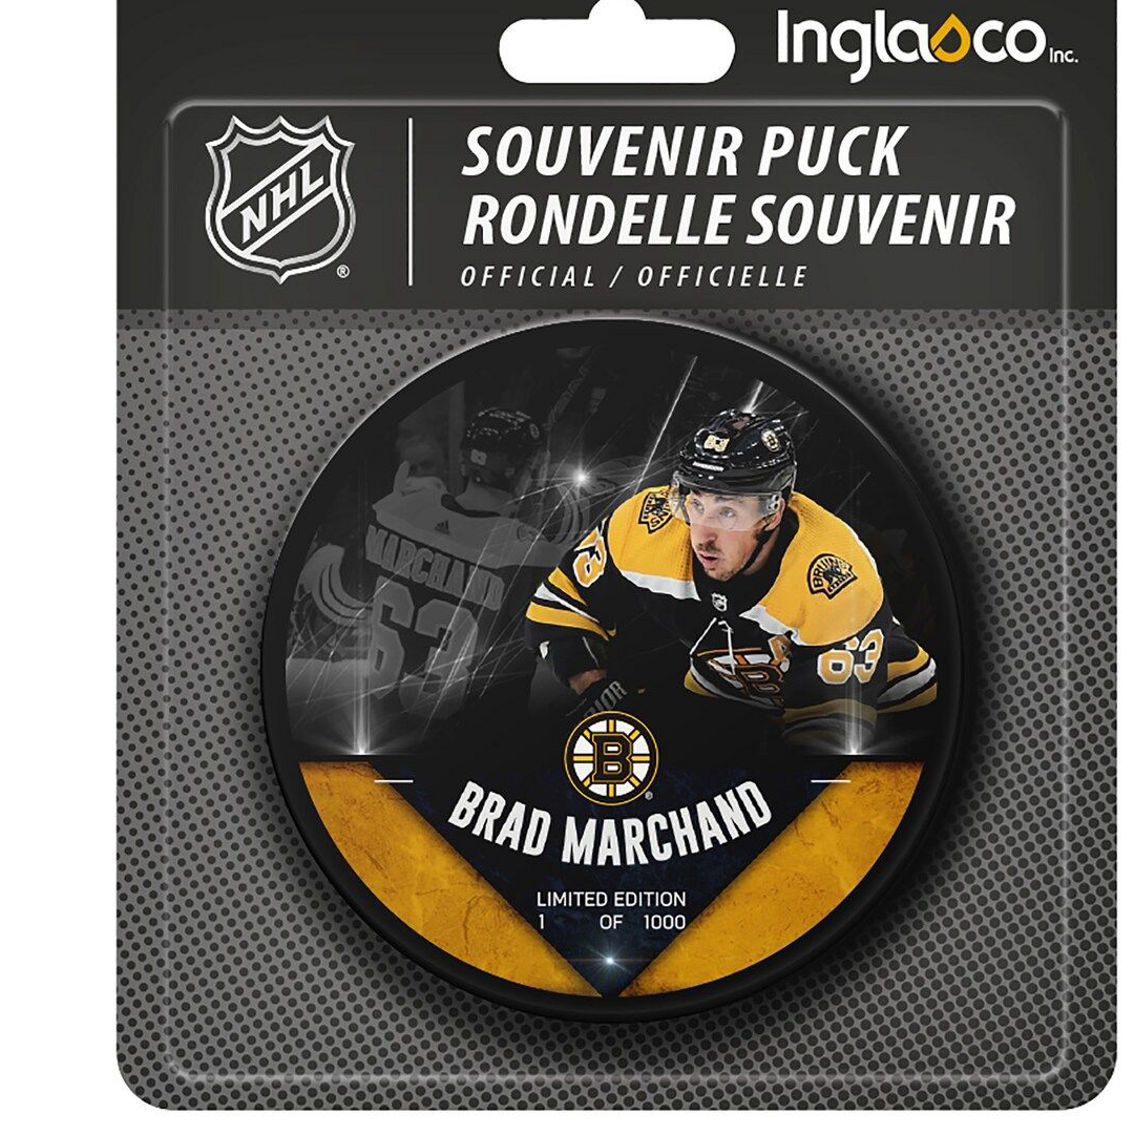 Fanatics Authentic Brad Marchand Boston Bruins Unsigned Fanatics Exclusive Player Hockey Puck - Limited Edition of 1000 - Image 4 of 4